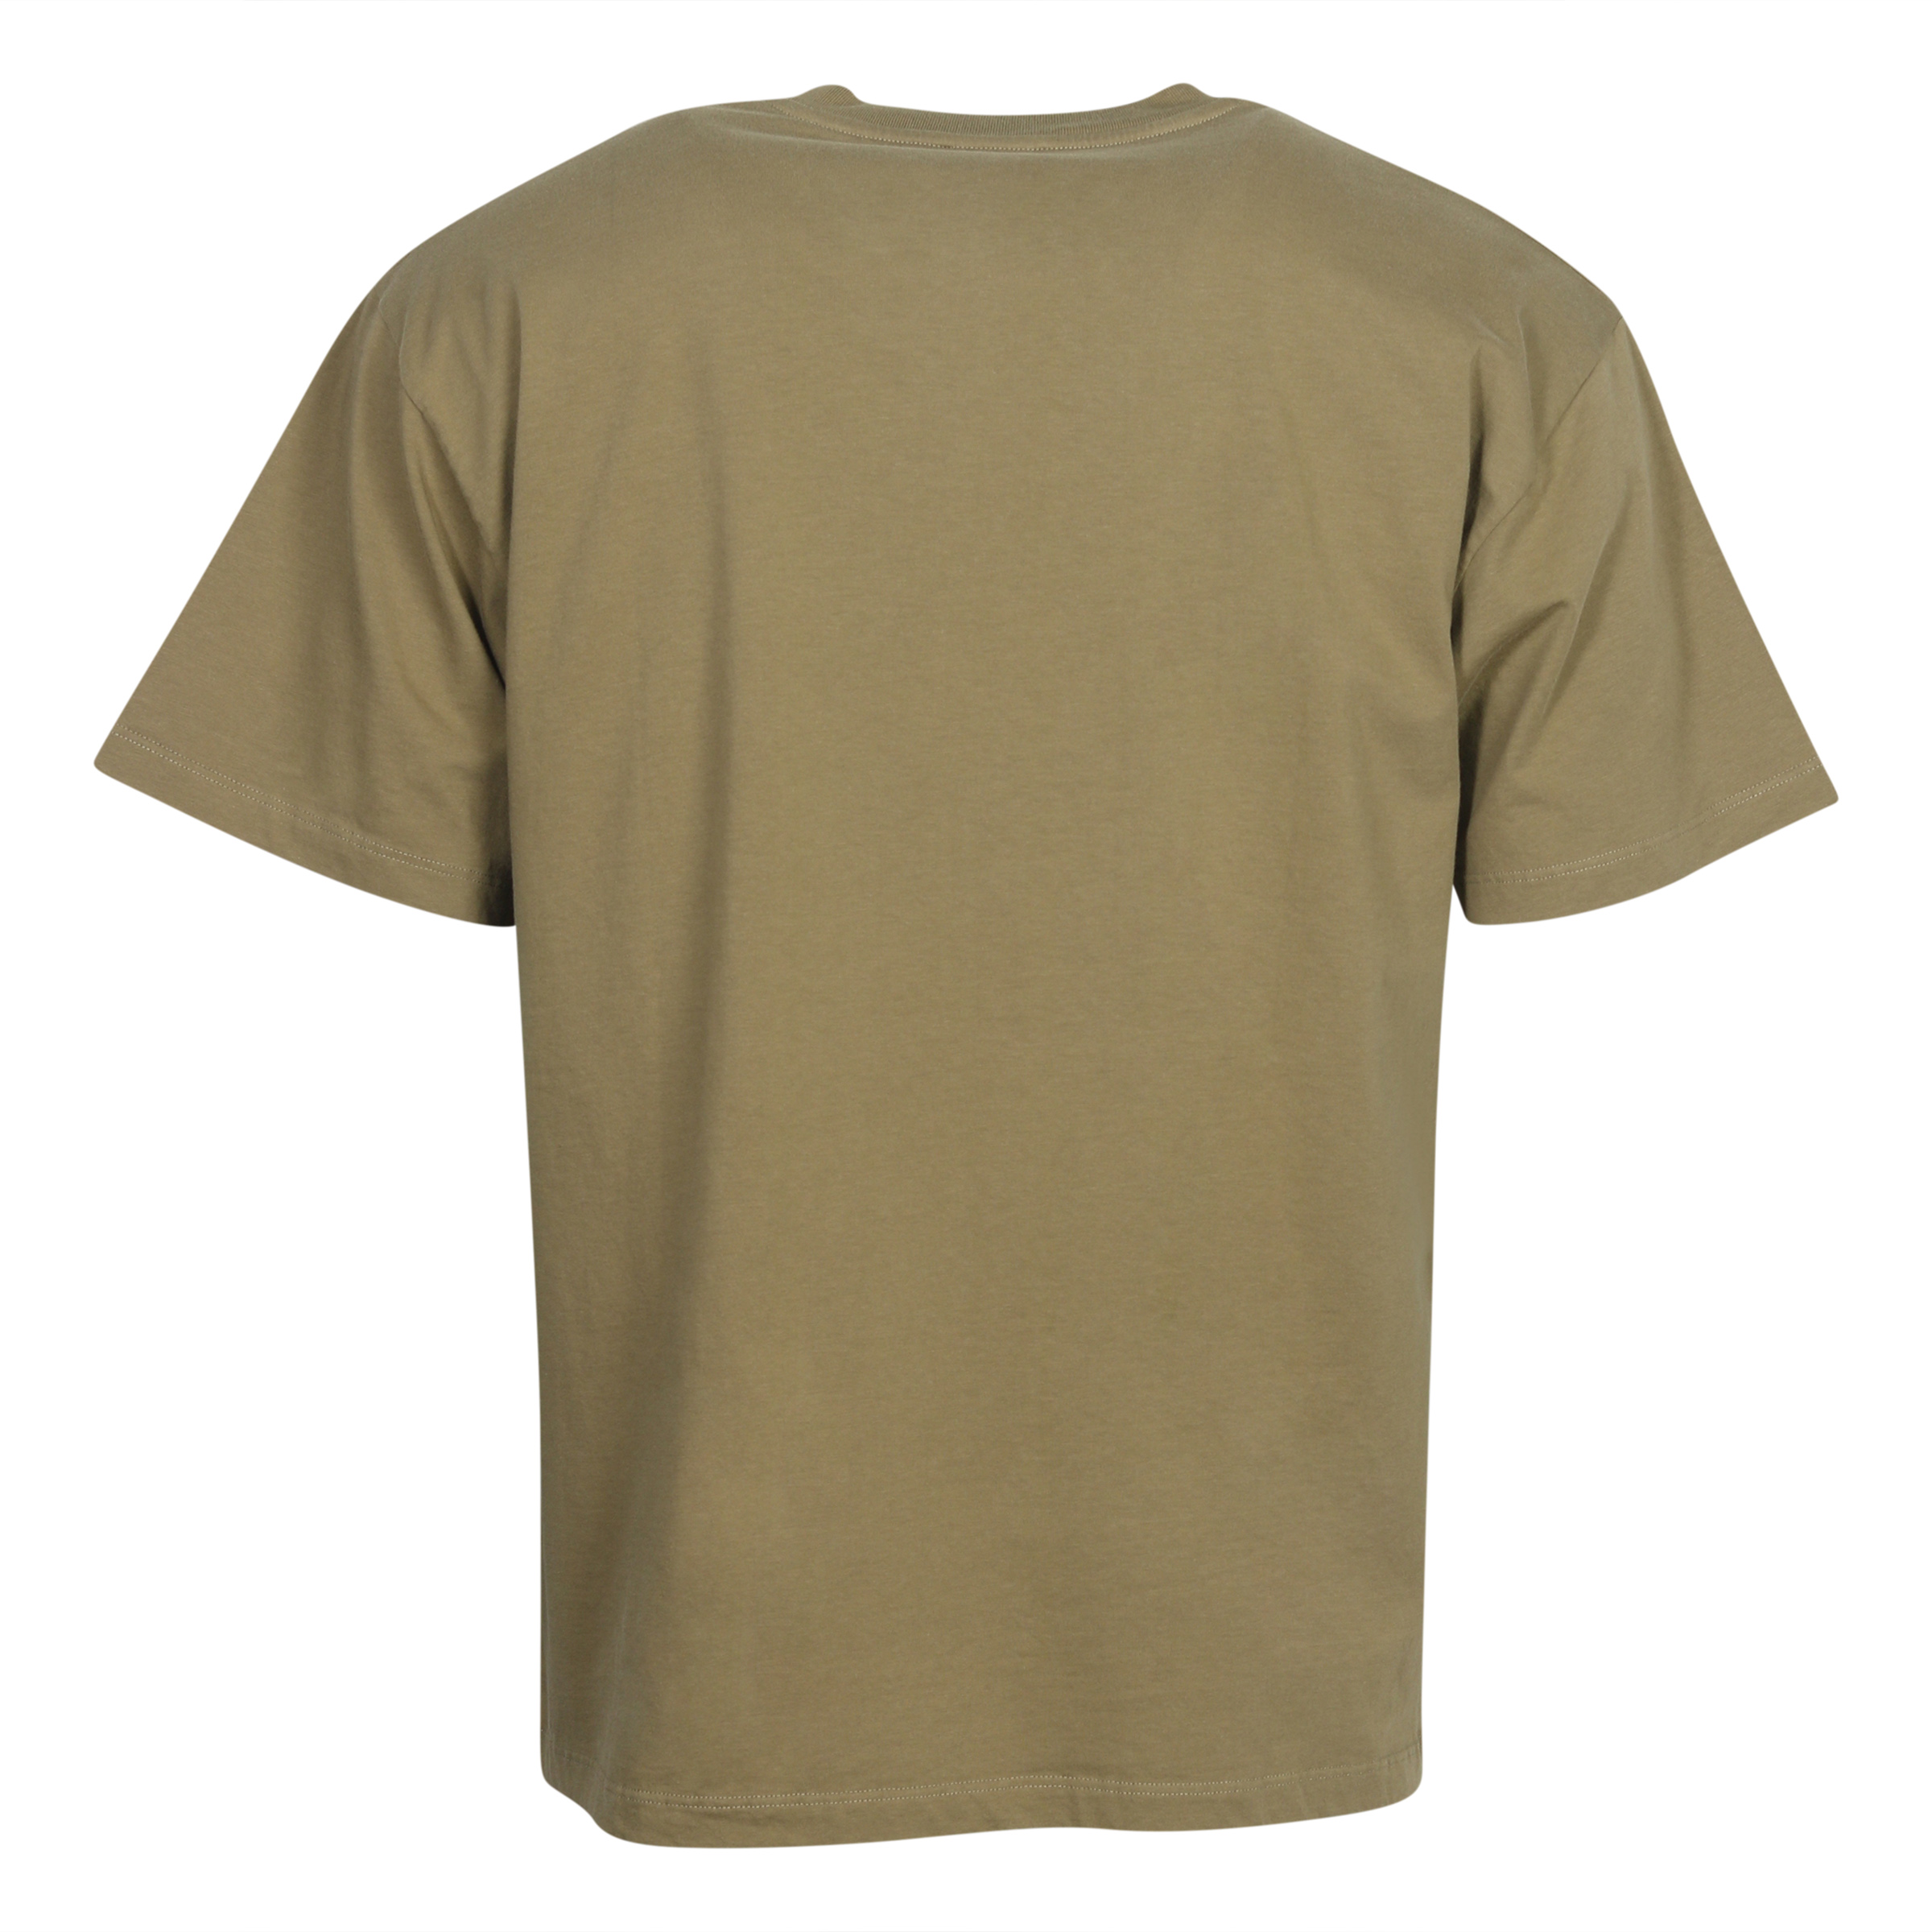 Unisex Aries Temple T-Shirt in Olive